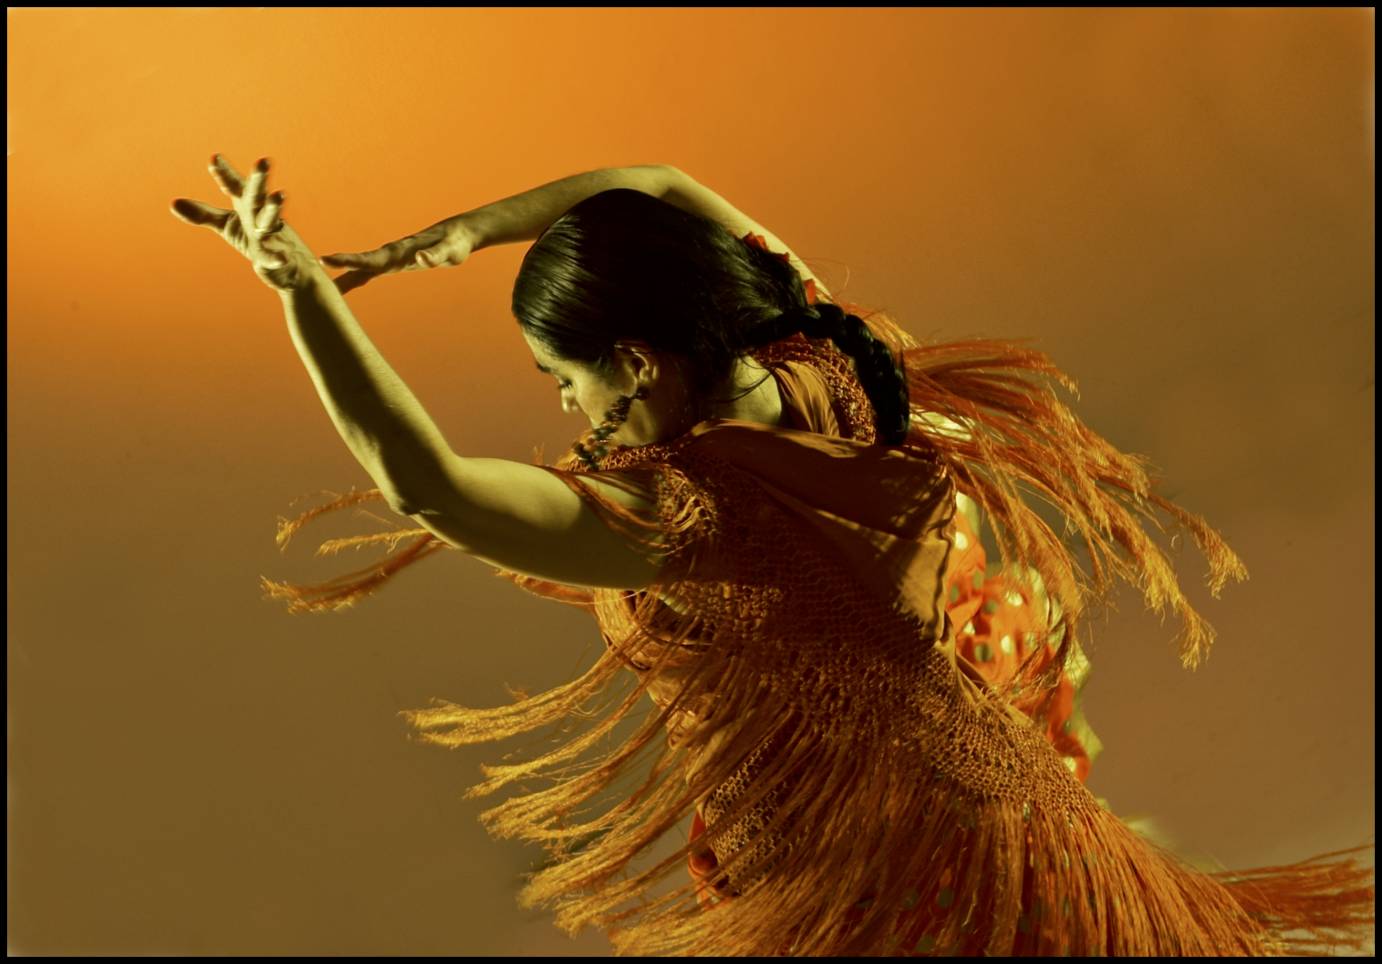 a very dynamically caught photo of a Spanish dancer from the back; she wears an orange fringed dress that swings in motion, and she is beautifully set against an orange background